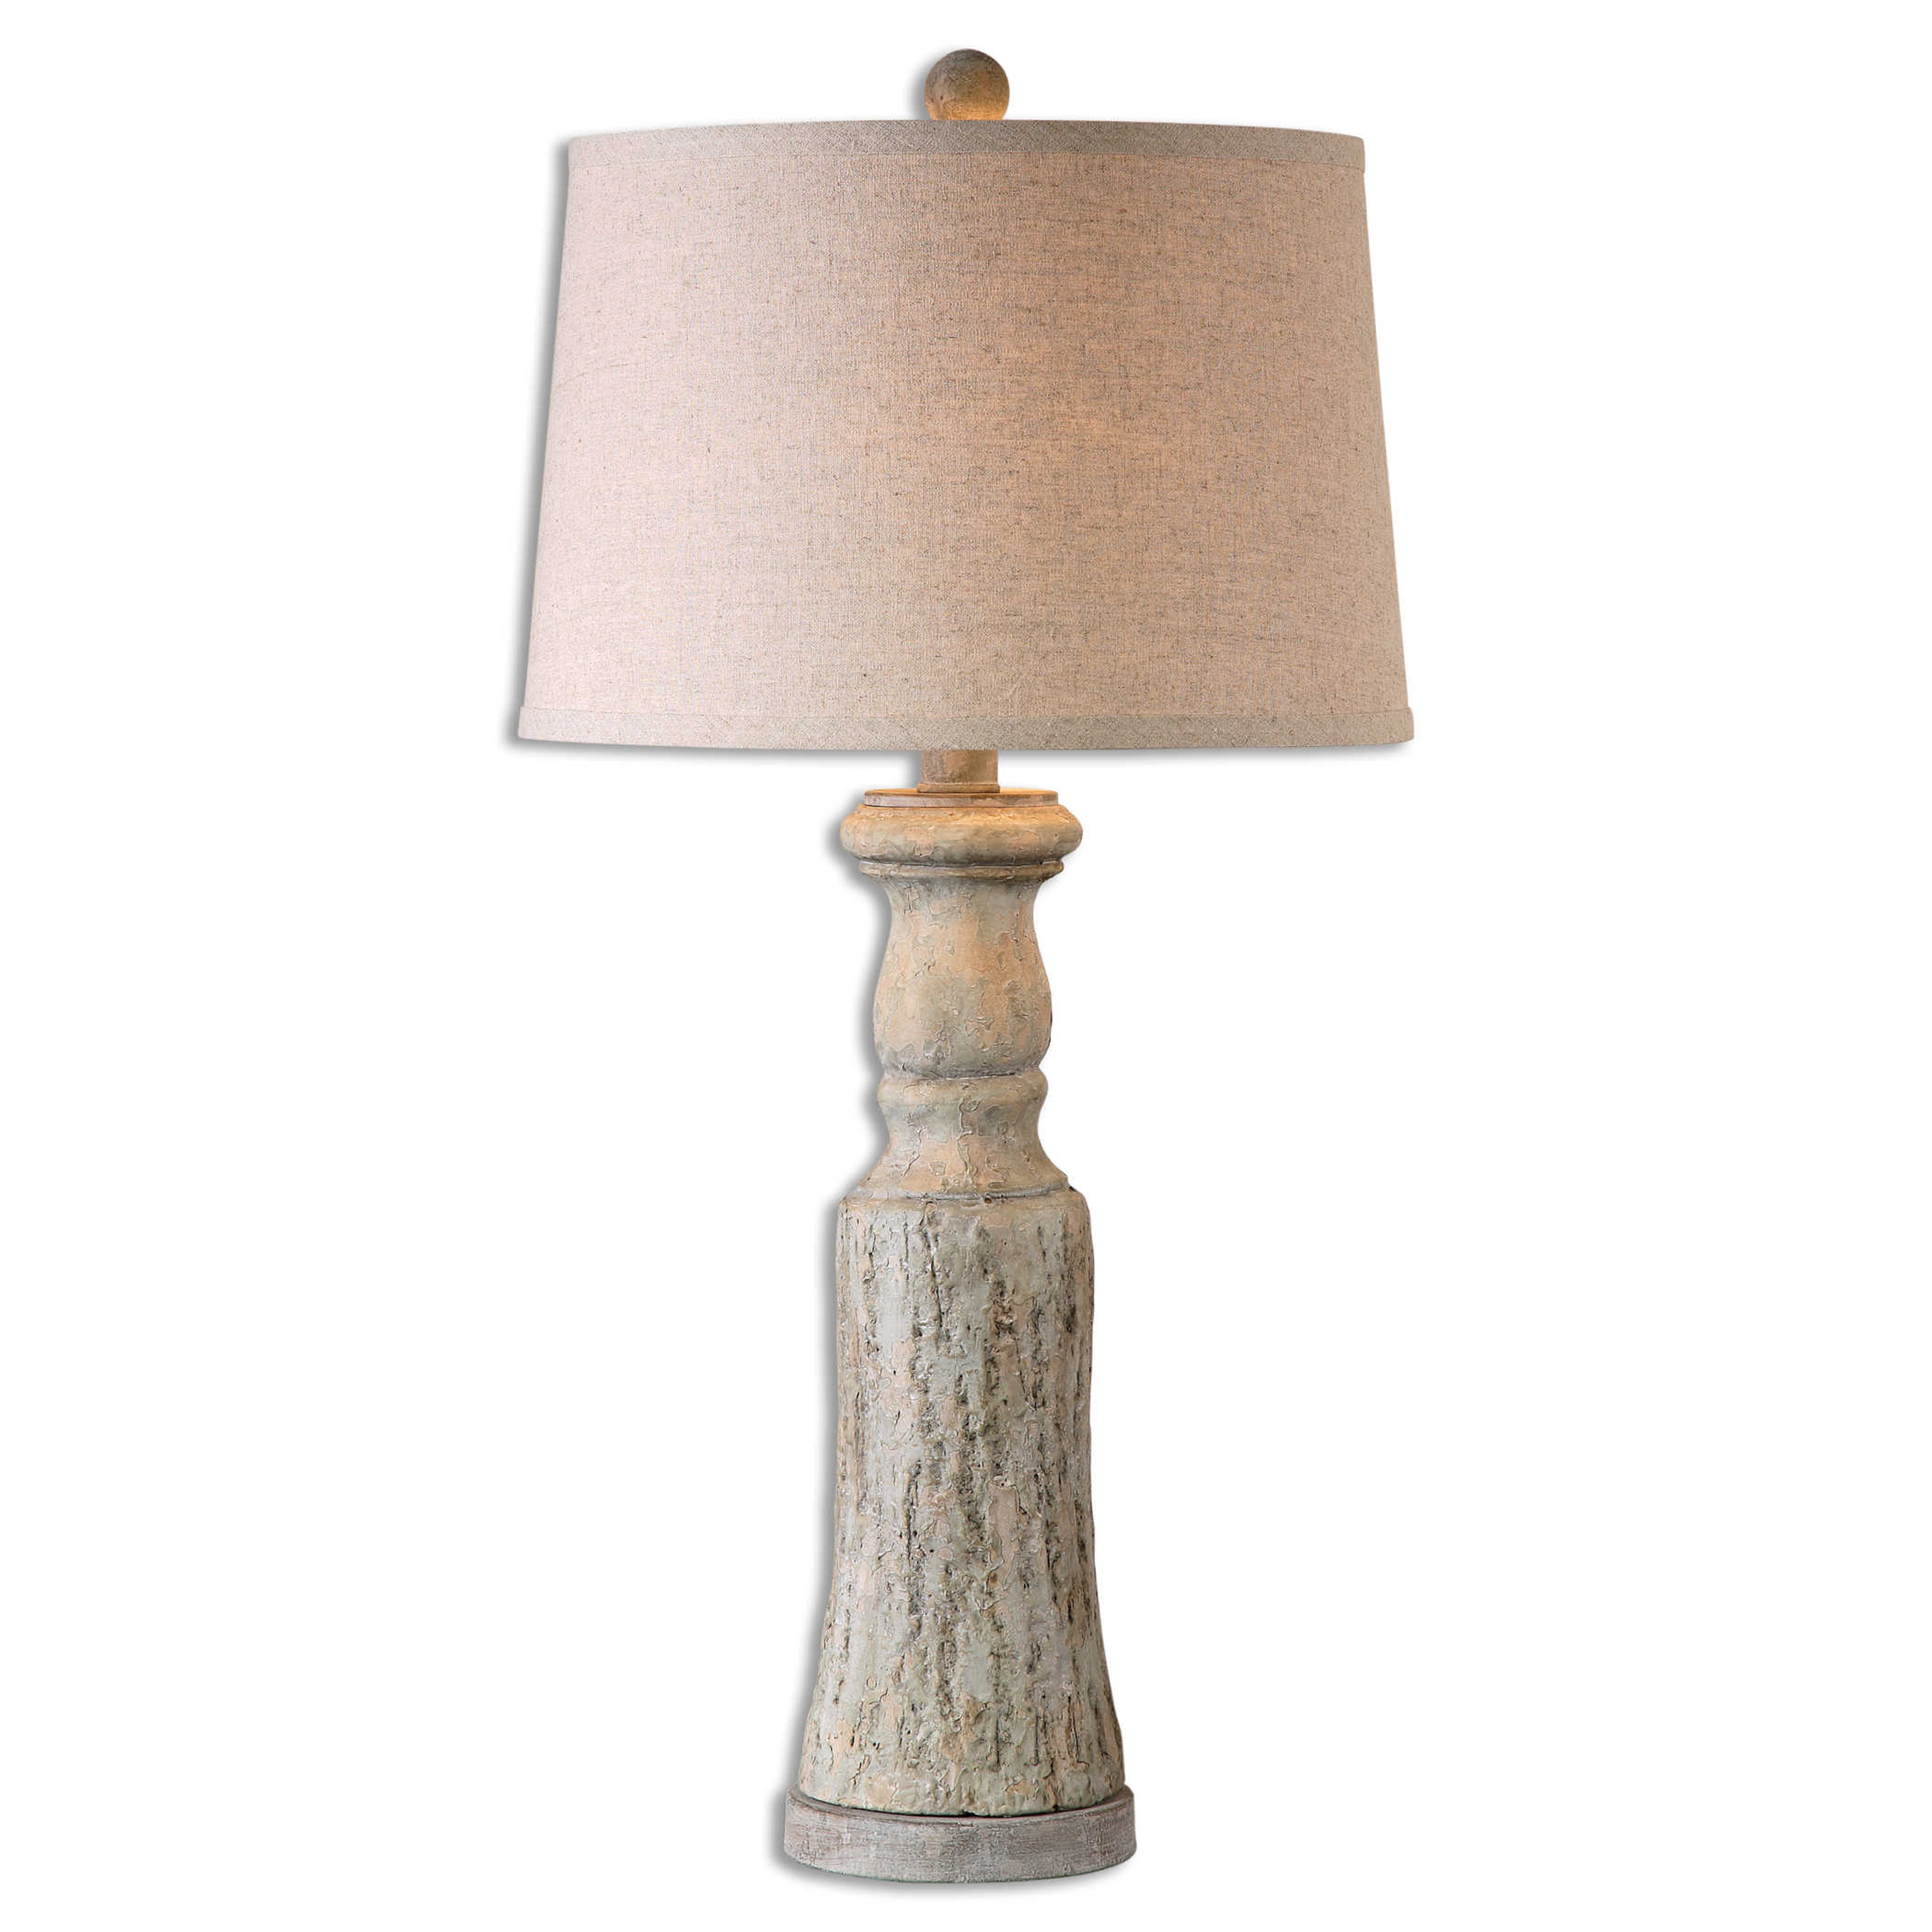 Clovery Table Lamp, Set of 2 - Hudsonhill Foundry